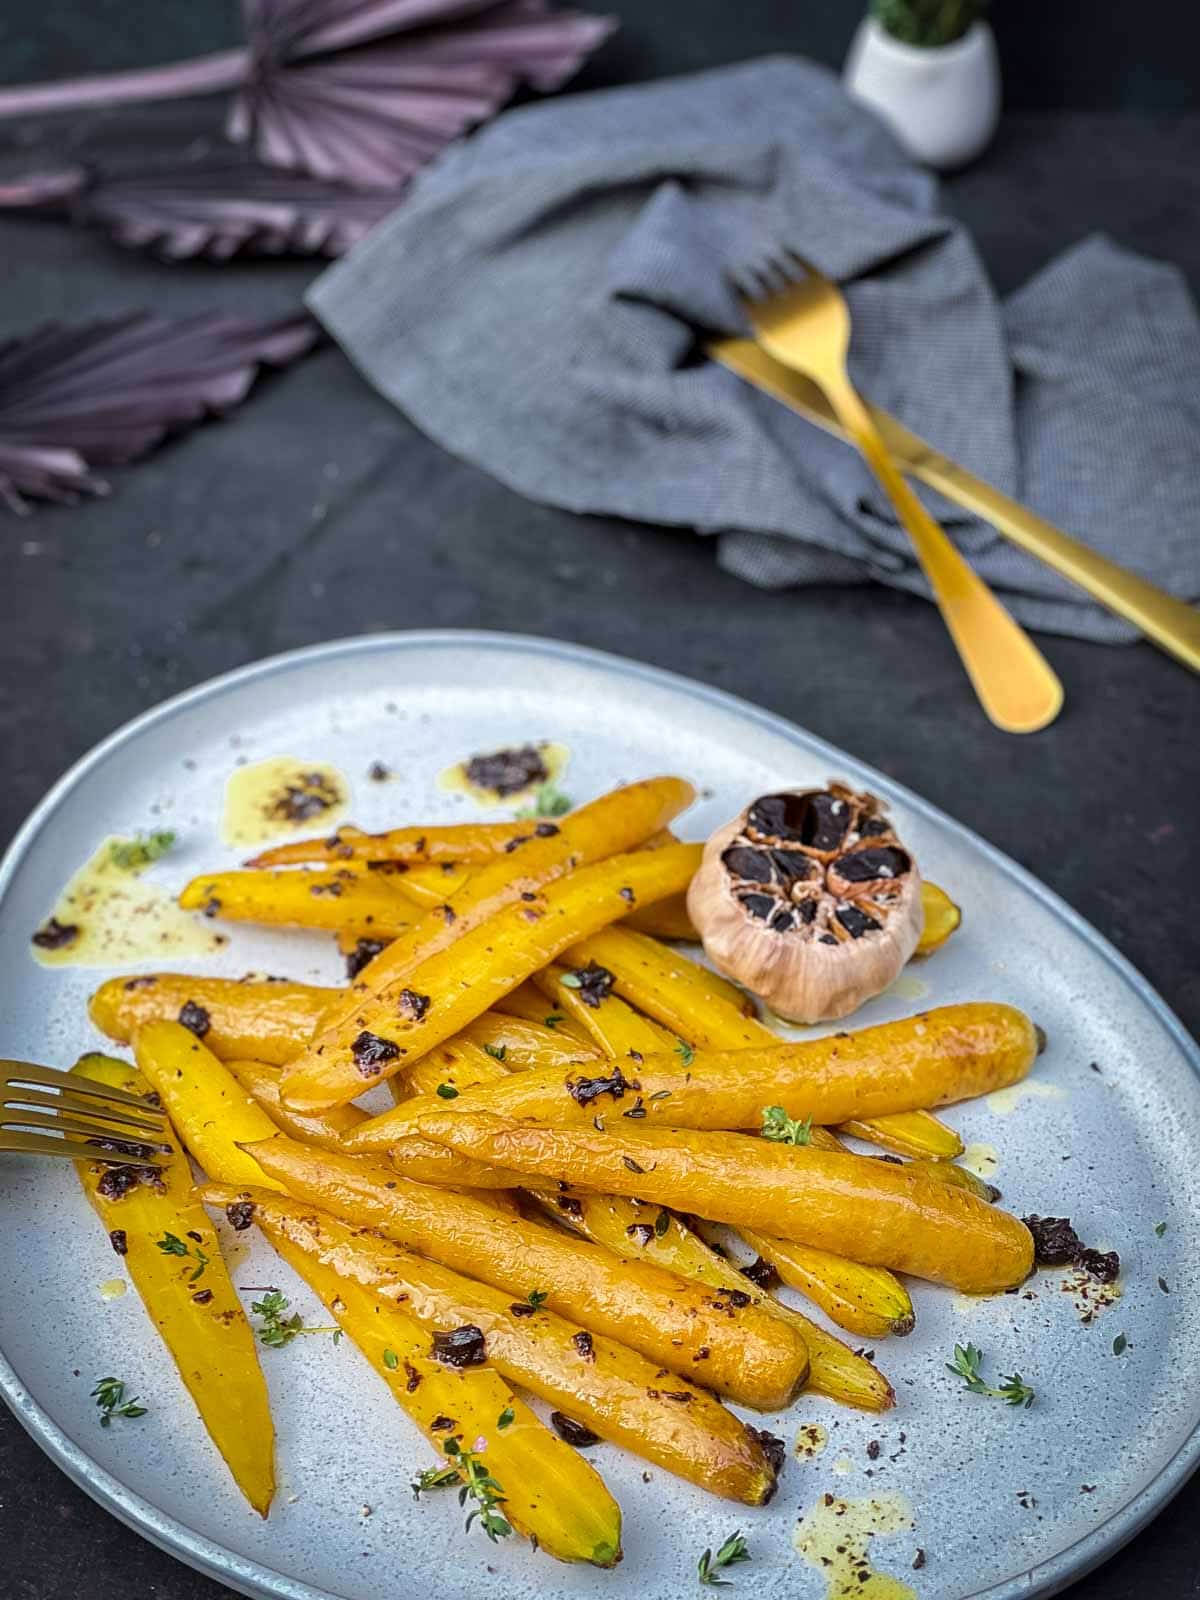 Roasted yellow carrots and black garlic on a blue salad platter with gold cutlery and blue napkin in the background